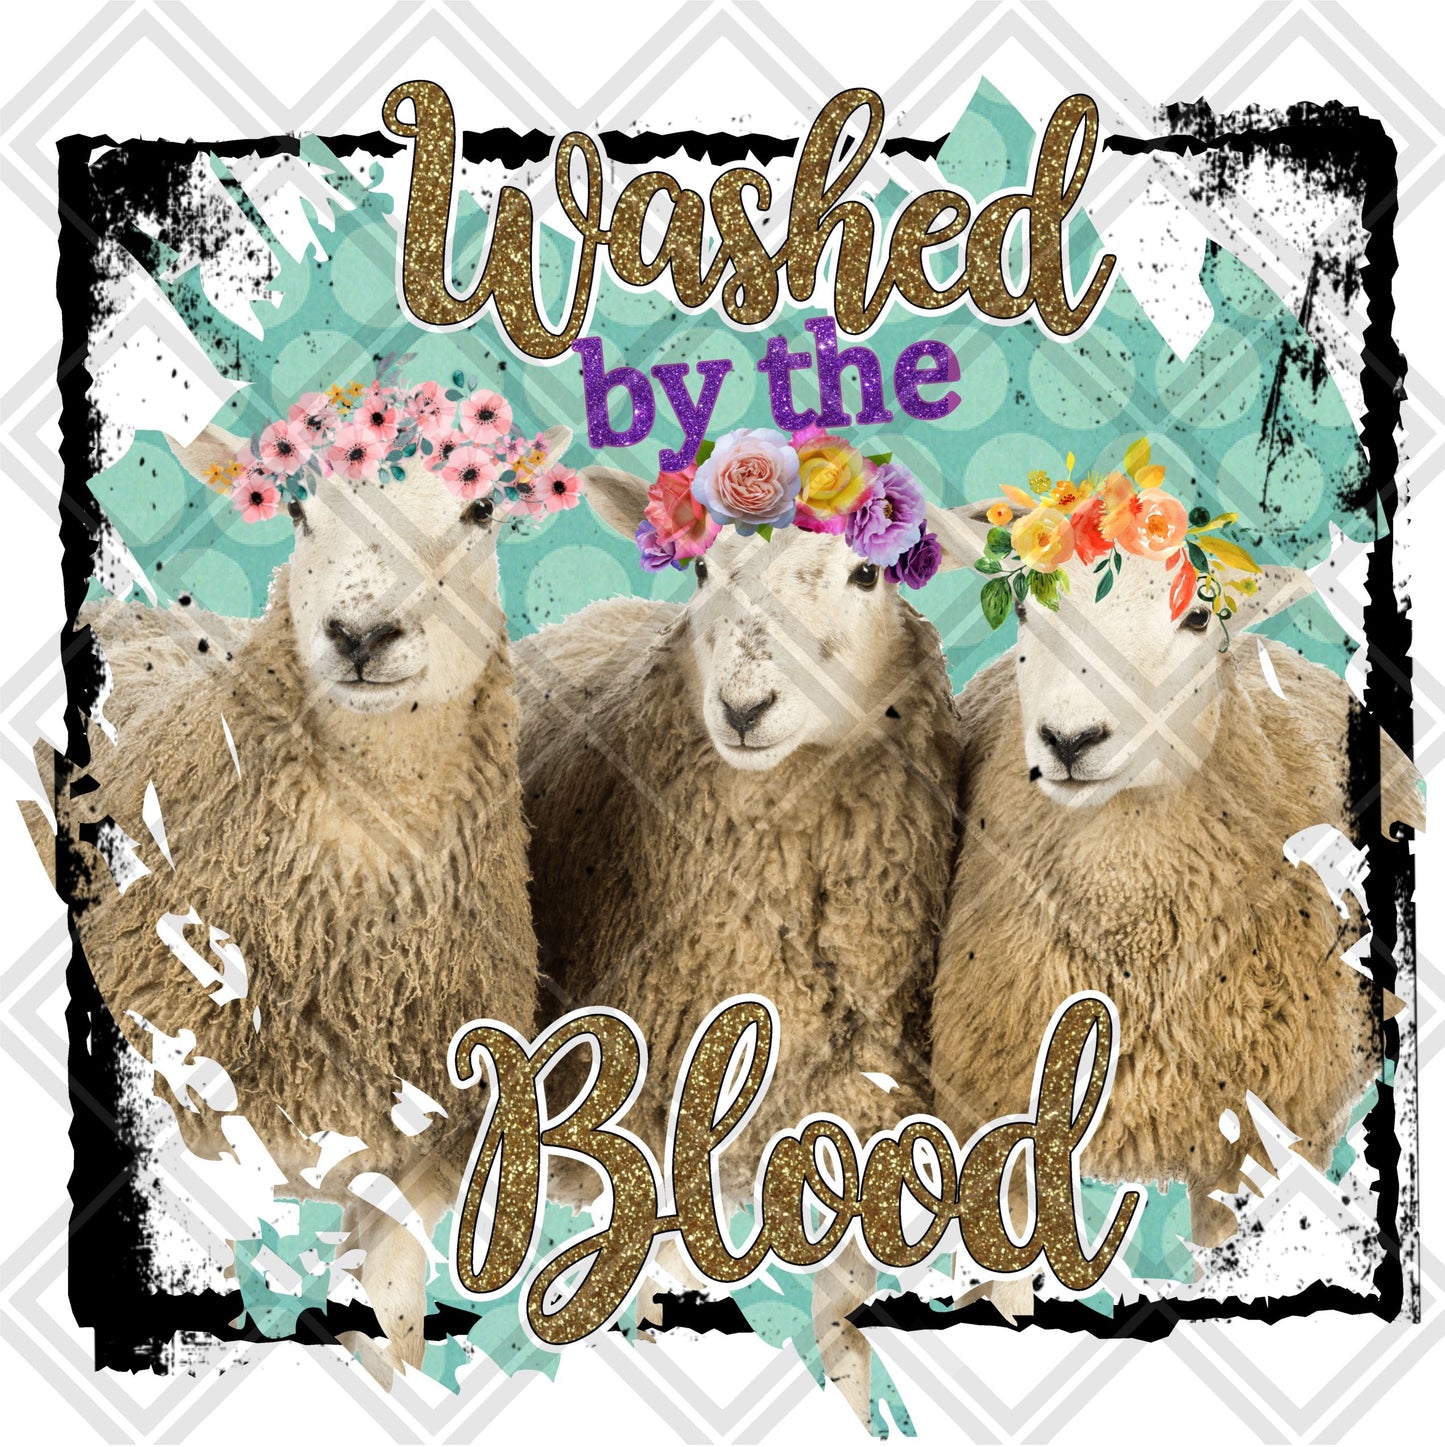 WASHED BY THE BLOOD SHEEP Digital Download Instand Download